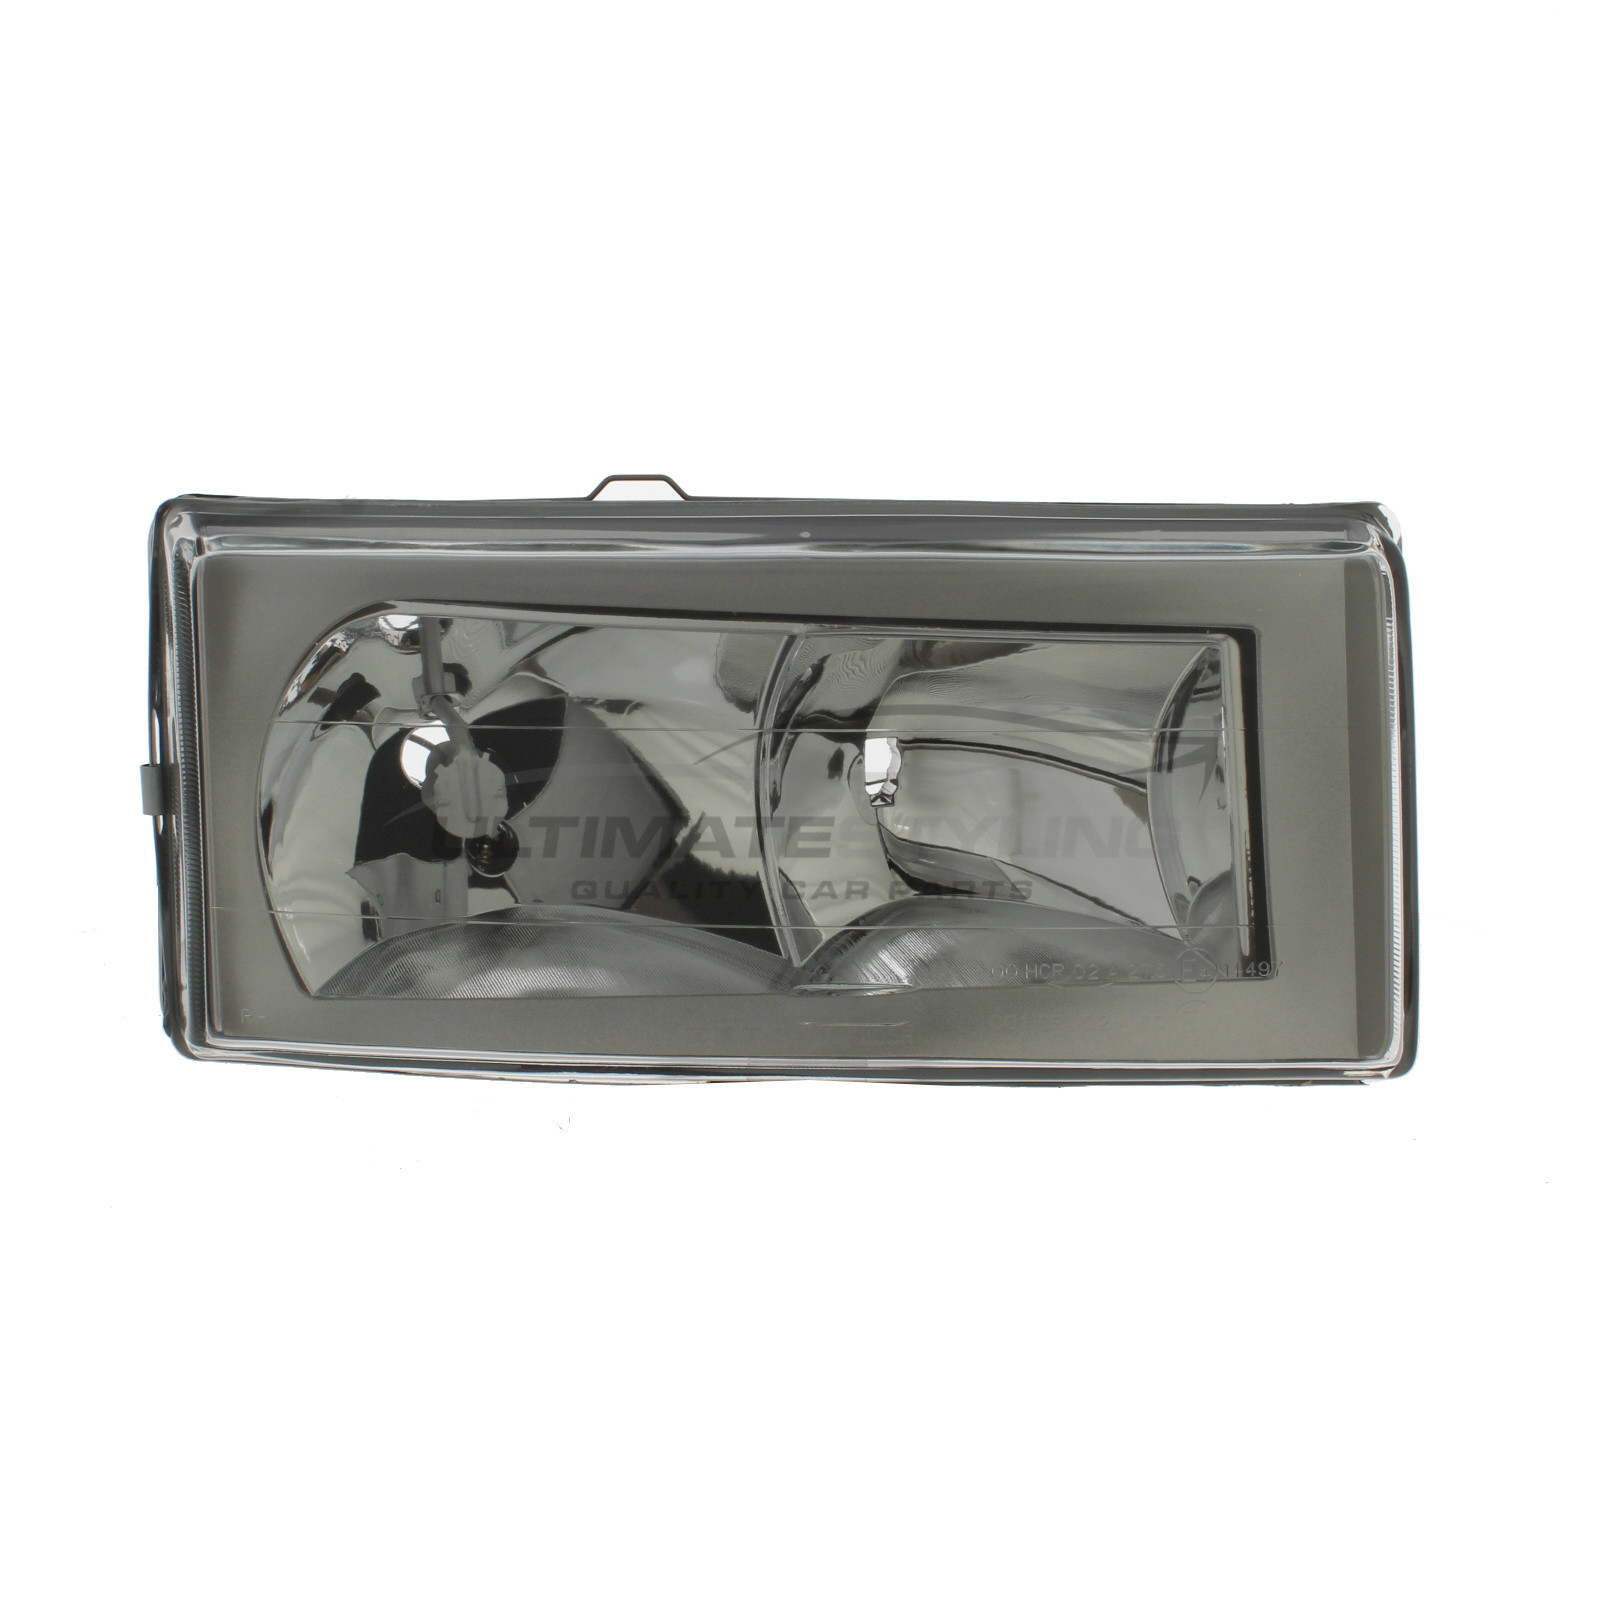 Iveco Daily 1999-2006 Halogen, Electric Without Motor, Chrome Headlight / Headlamp Drivers Side (RH)